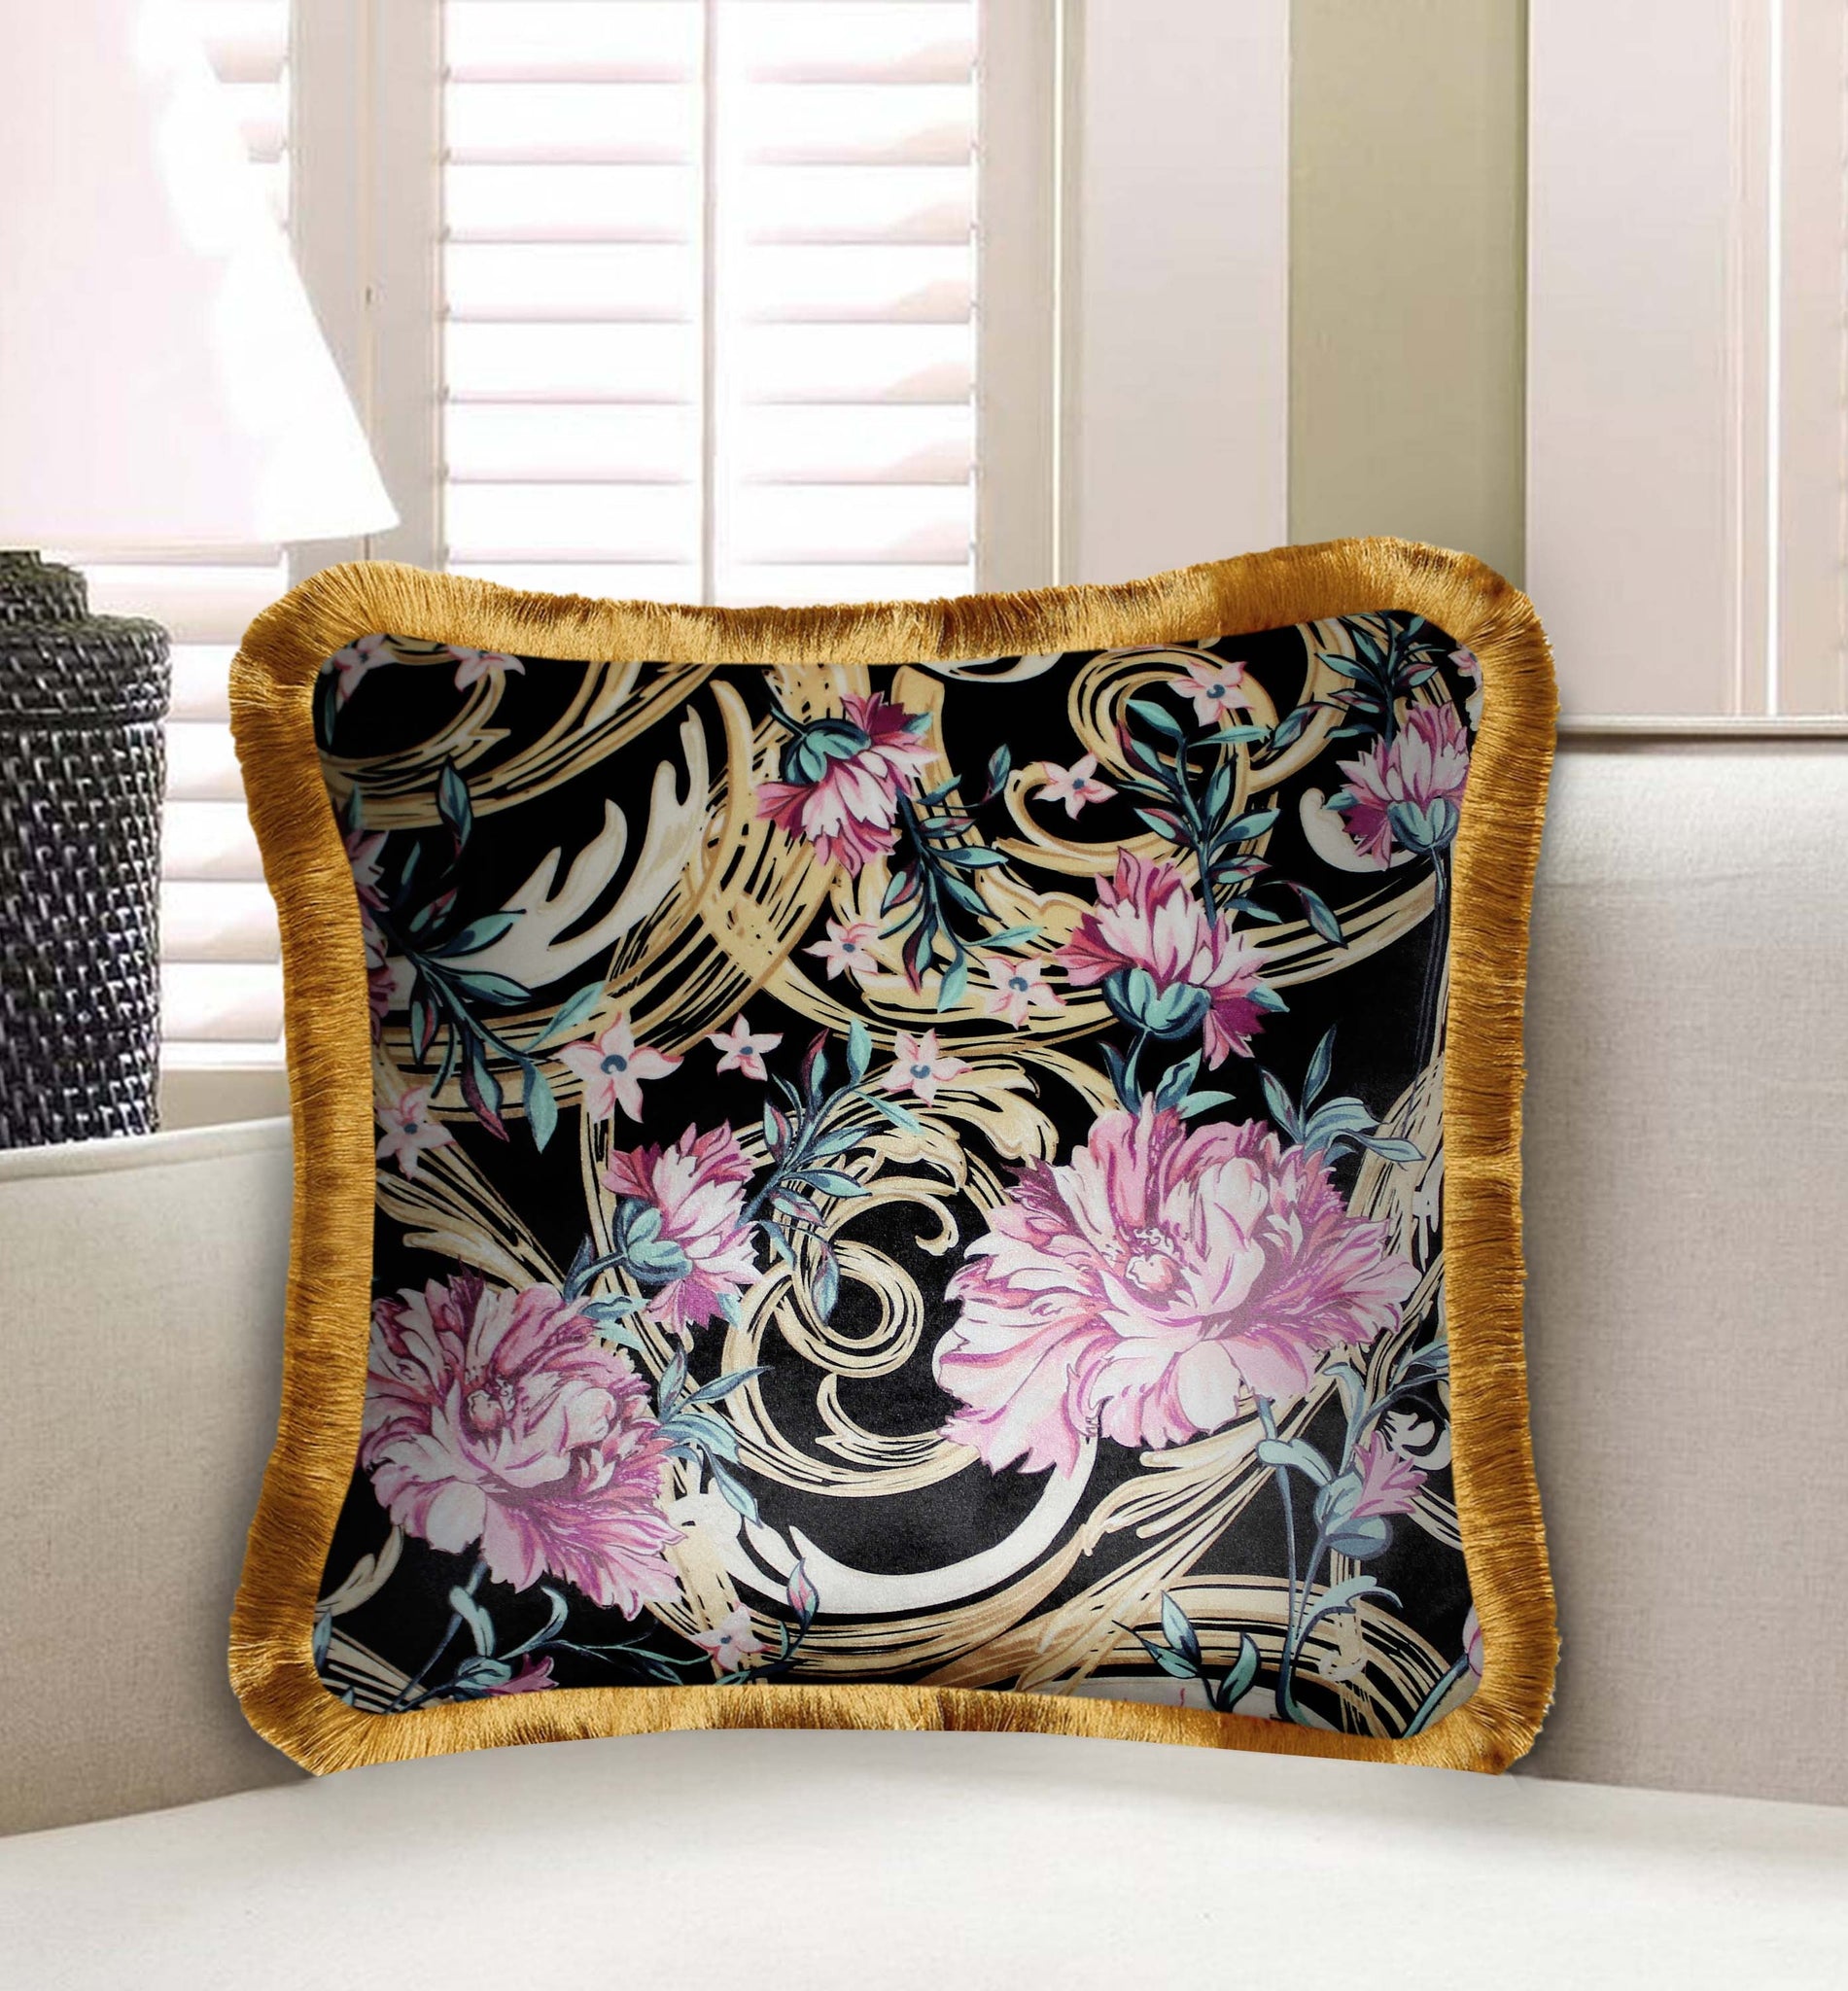  Velvet Cushion Cover Exotic Flower Decorative pillowcase Floral and Baroque Swirl Décor Throw Pillow for Sofa Chair Bedroom Living Room Multi Color 45x45cm (18x18 Inches)